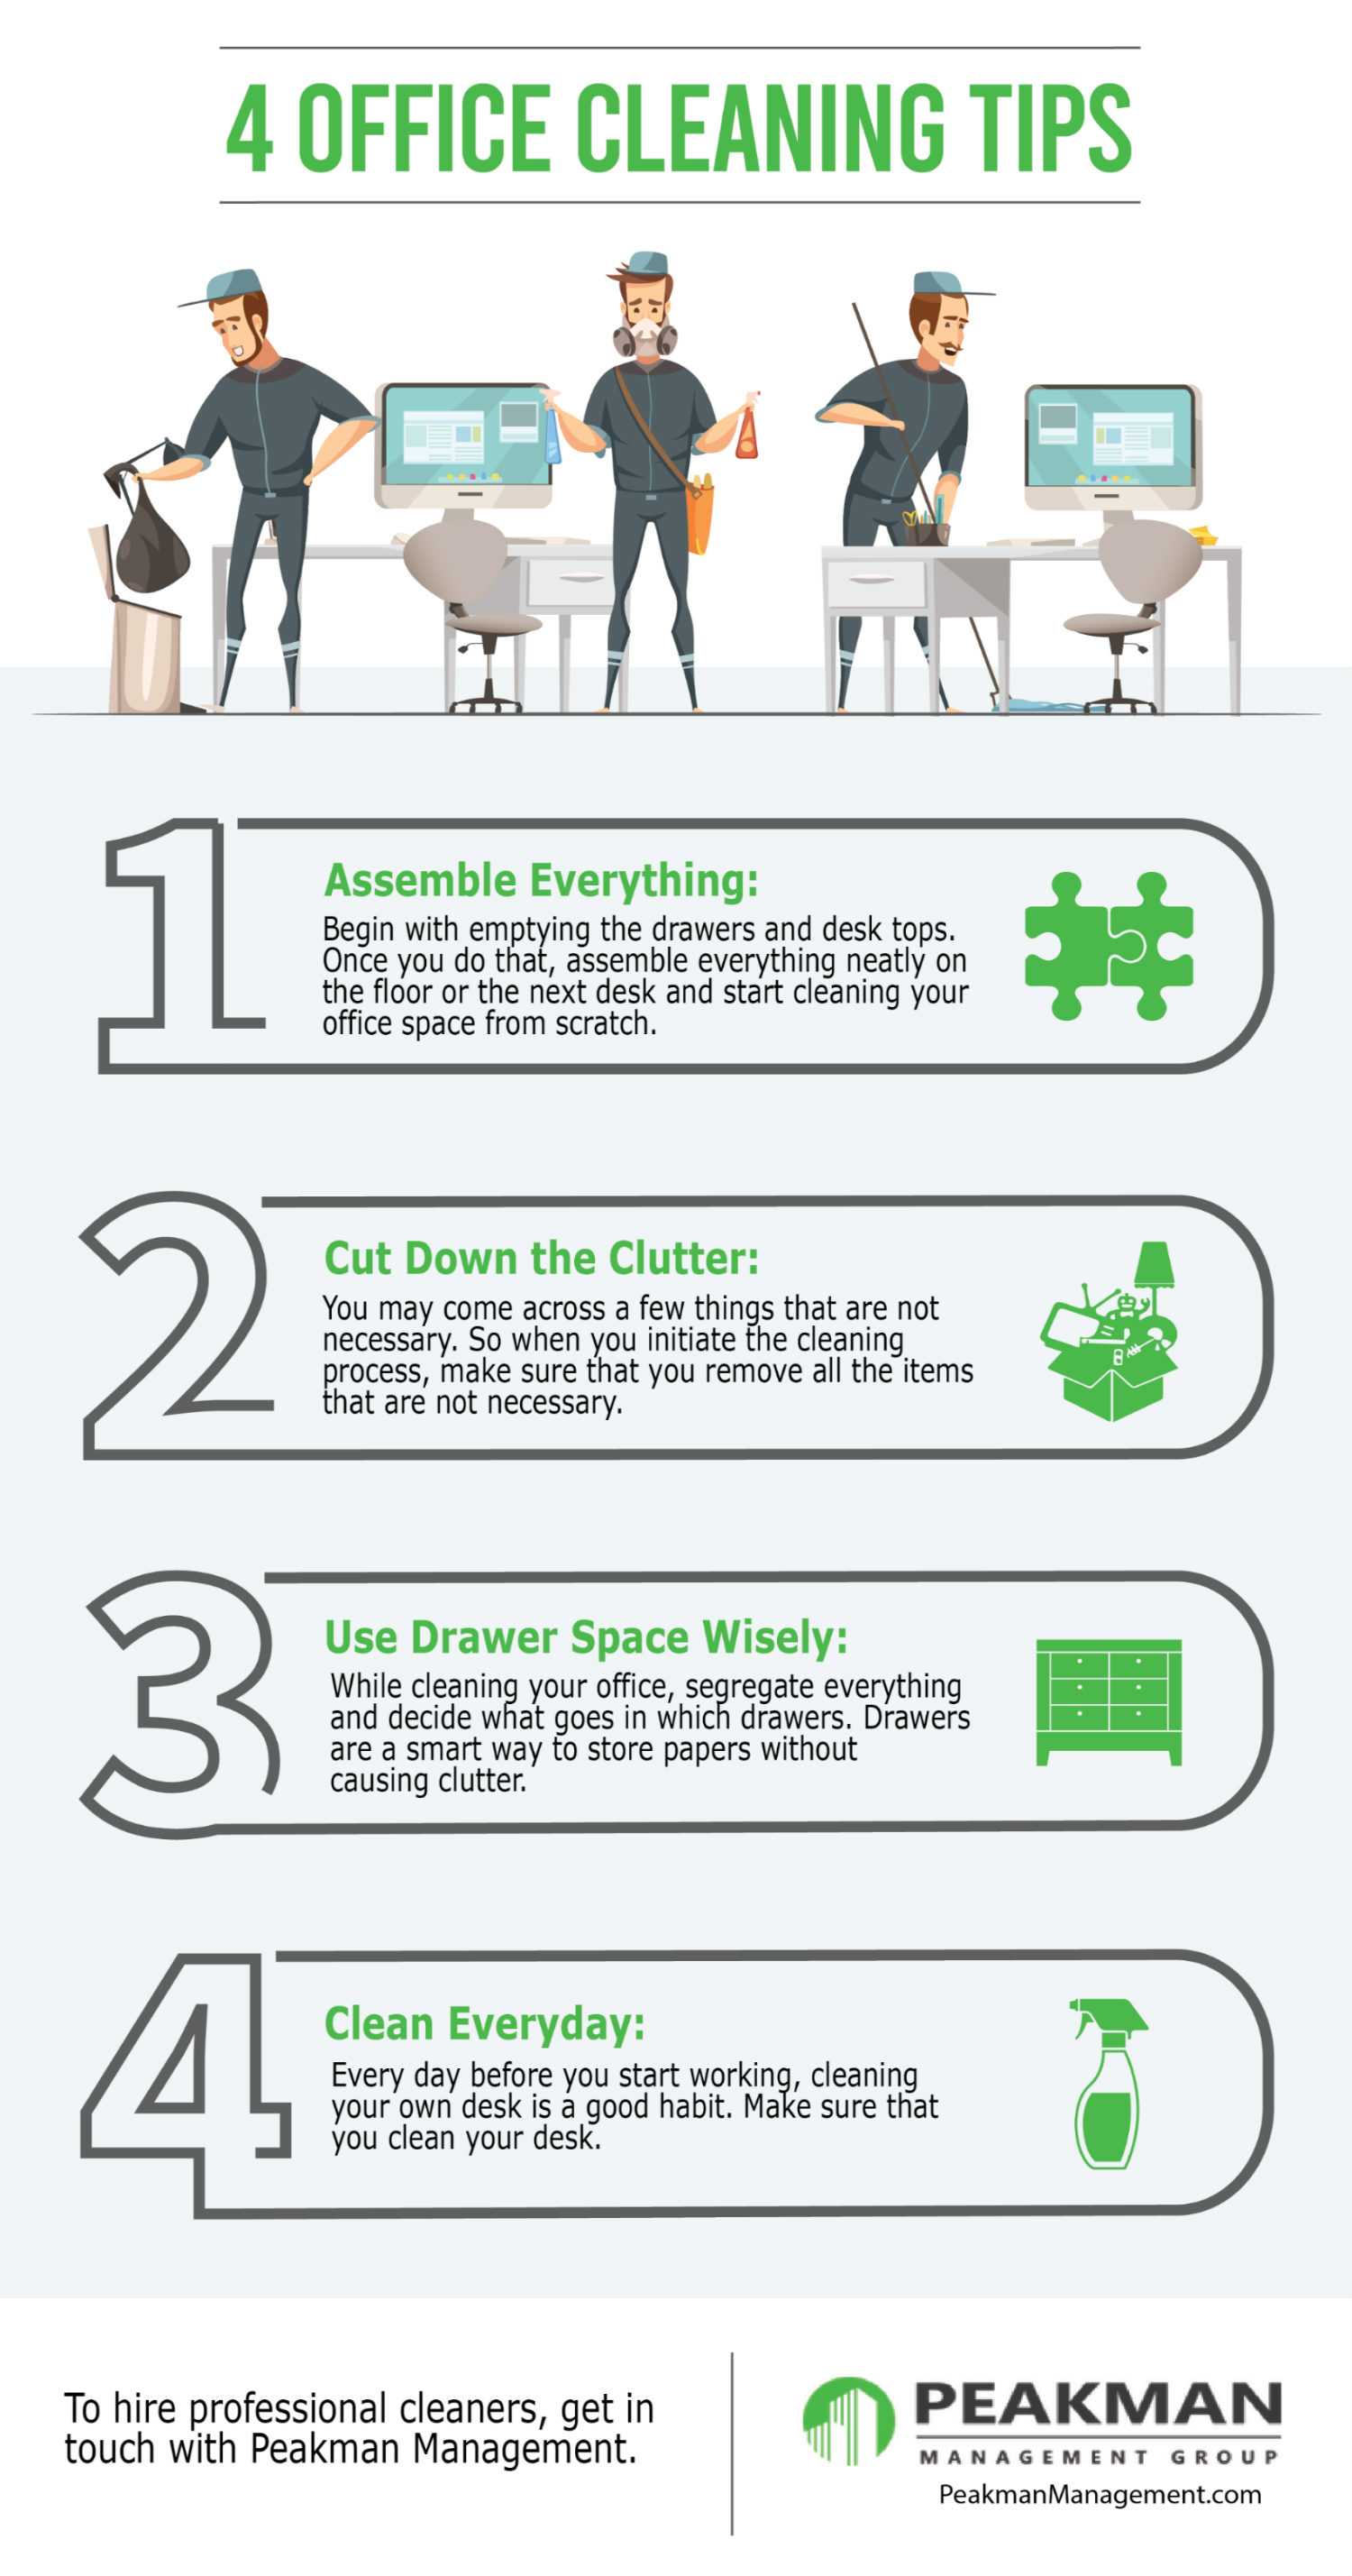 Office Cleaning Tips